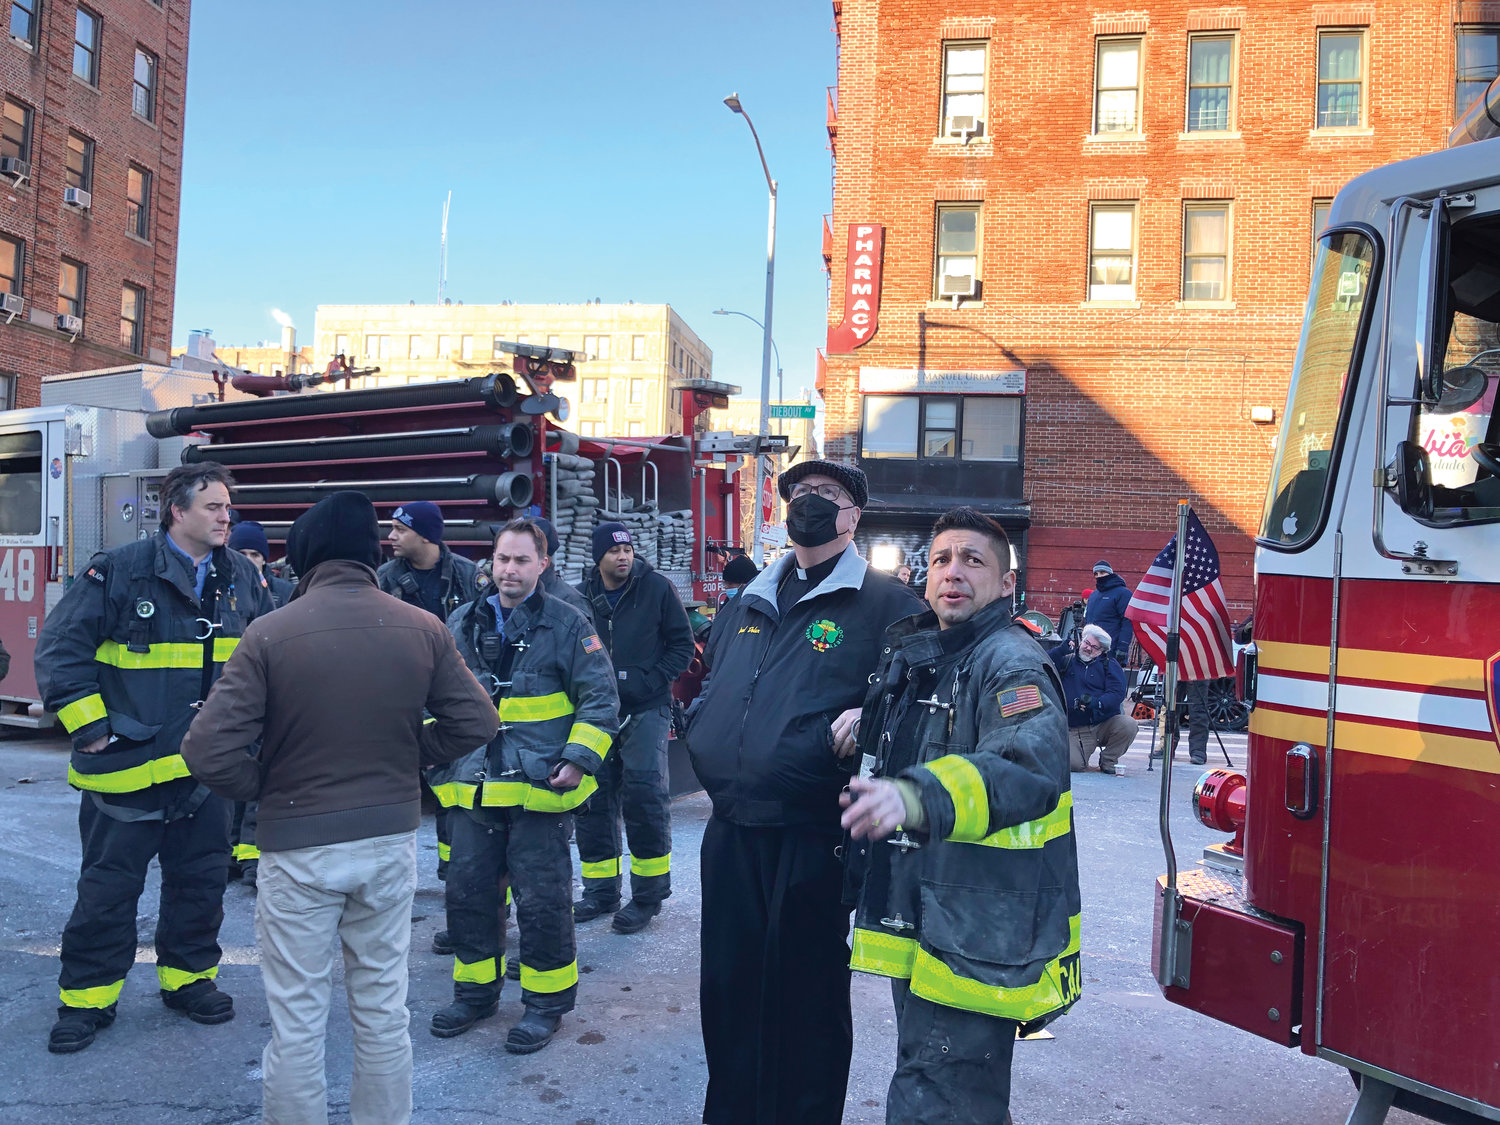 Cardinal Dolan looks over the scene with firefighters on the morning of Jan. 10.